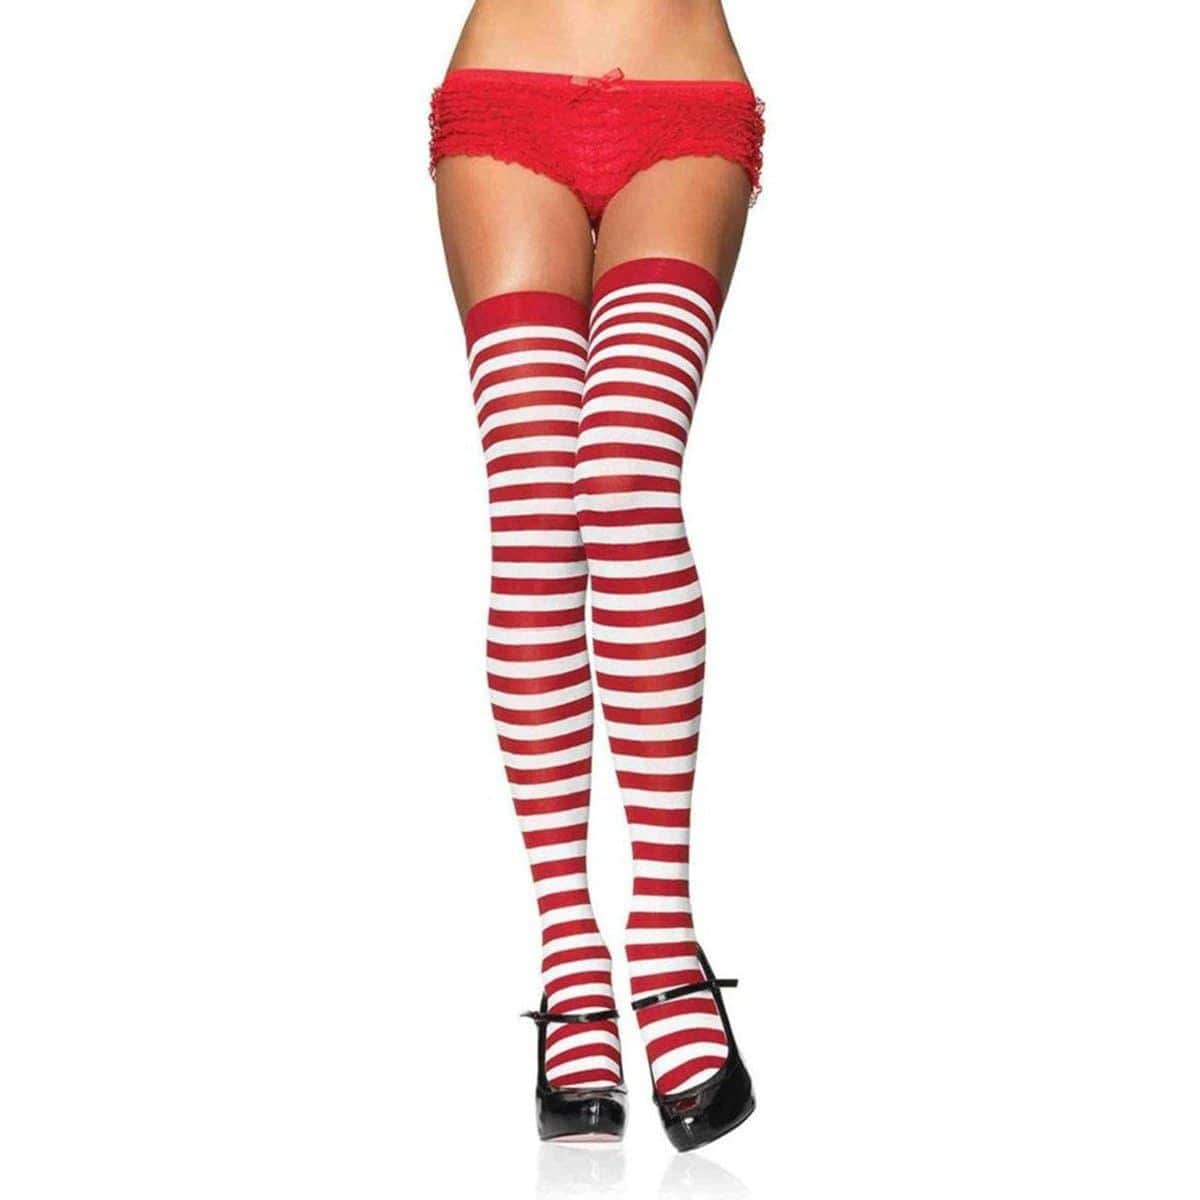 Buy Costume Accessories White & red striped nylon thigh high socks for women sold at Party Expert